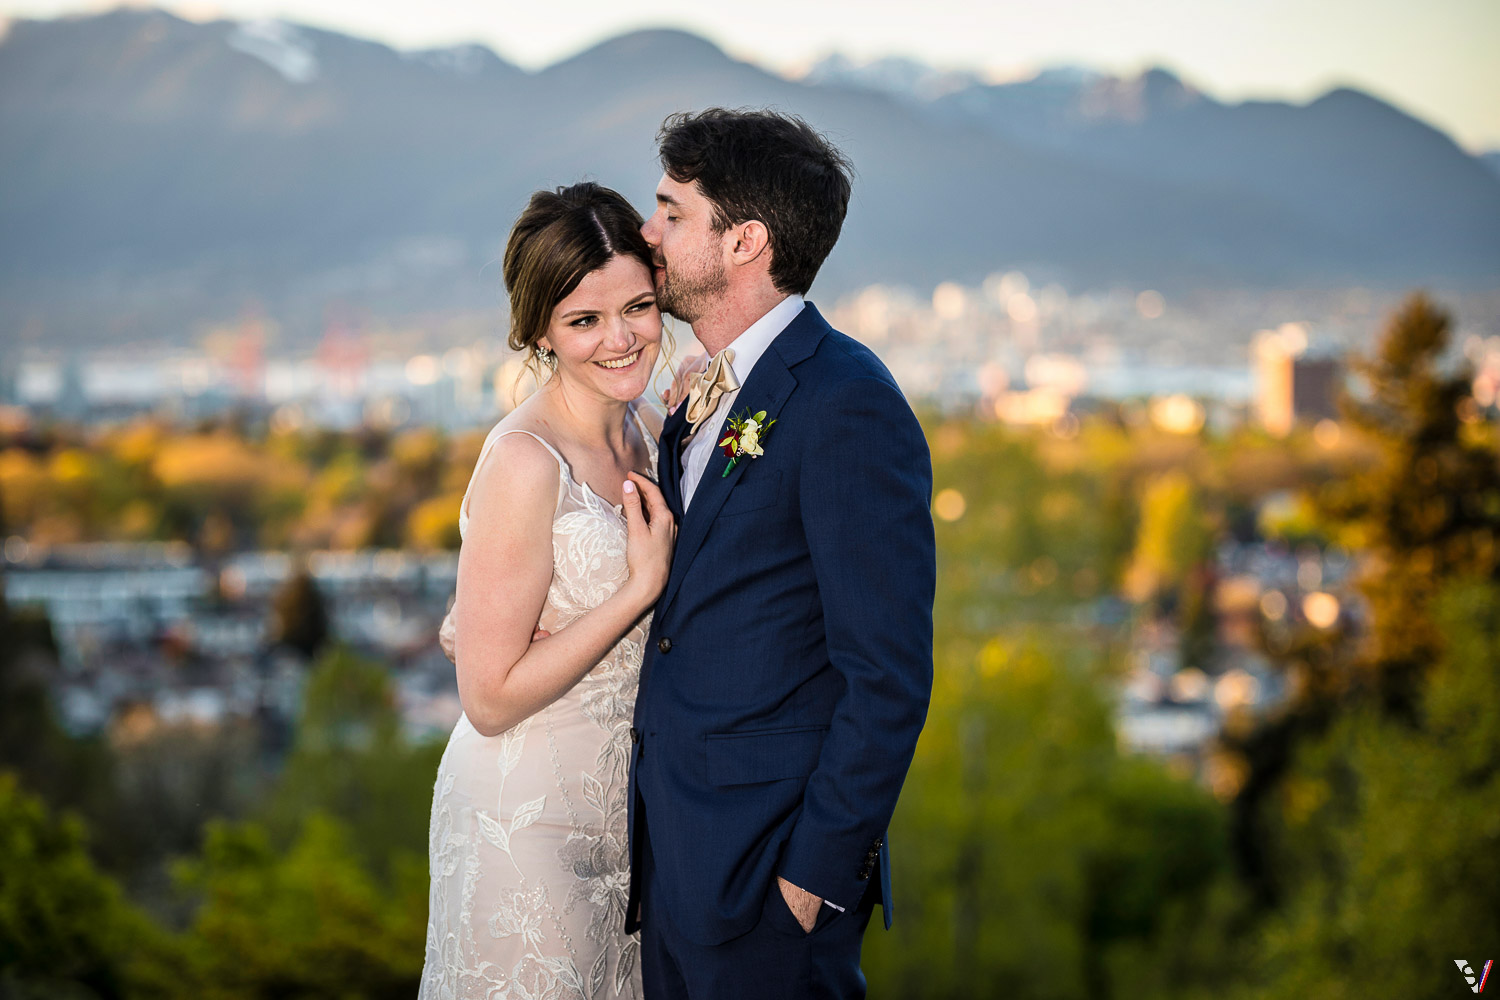 Sunset photo married couple at QE park Vancouver